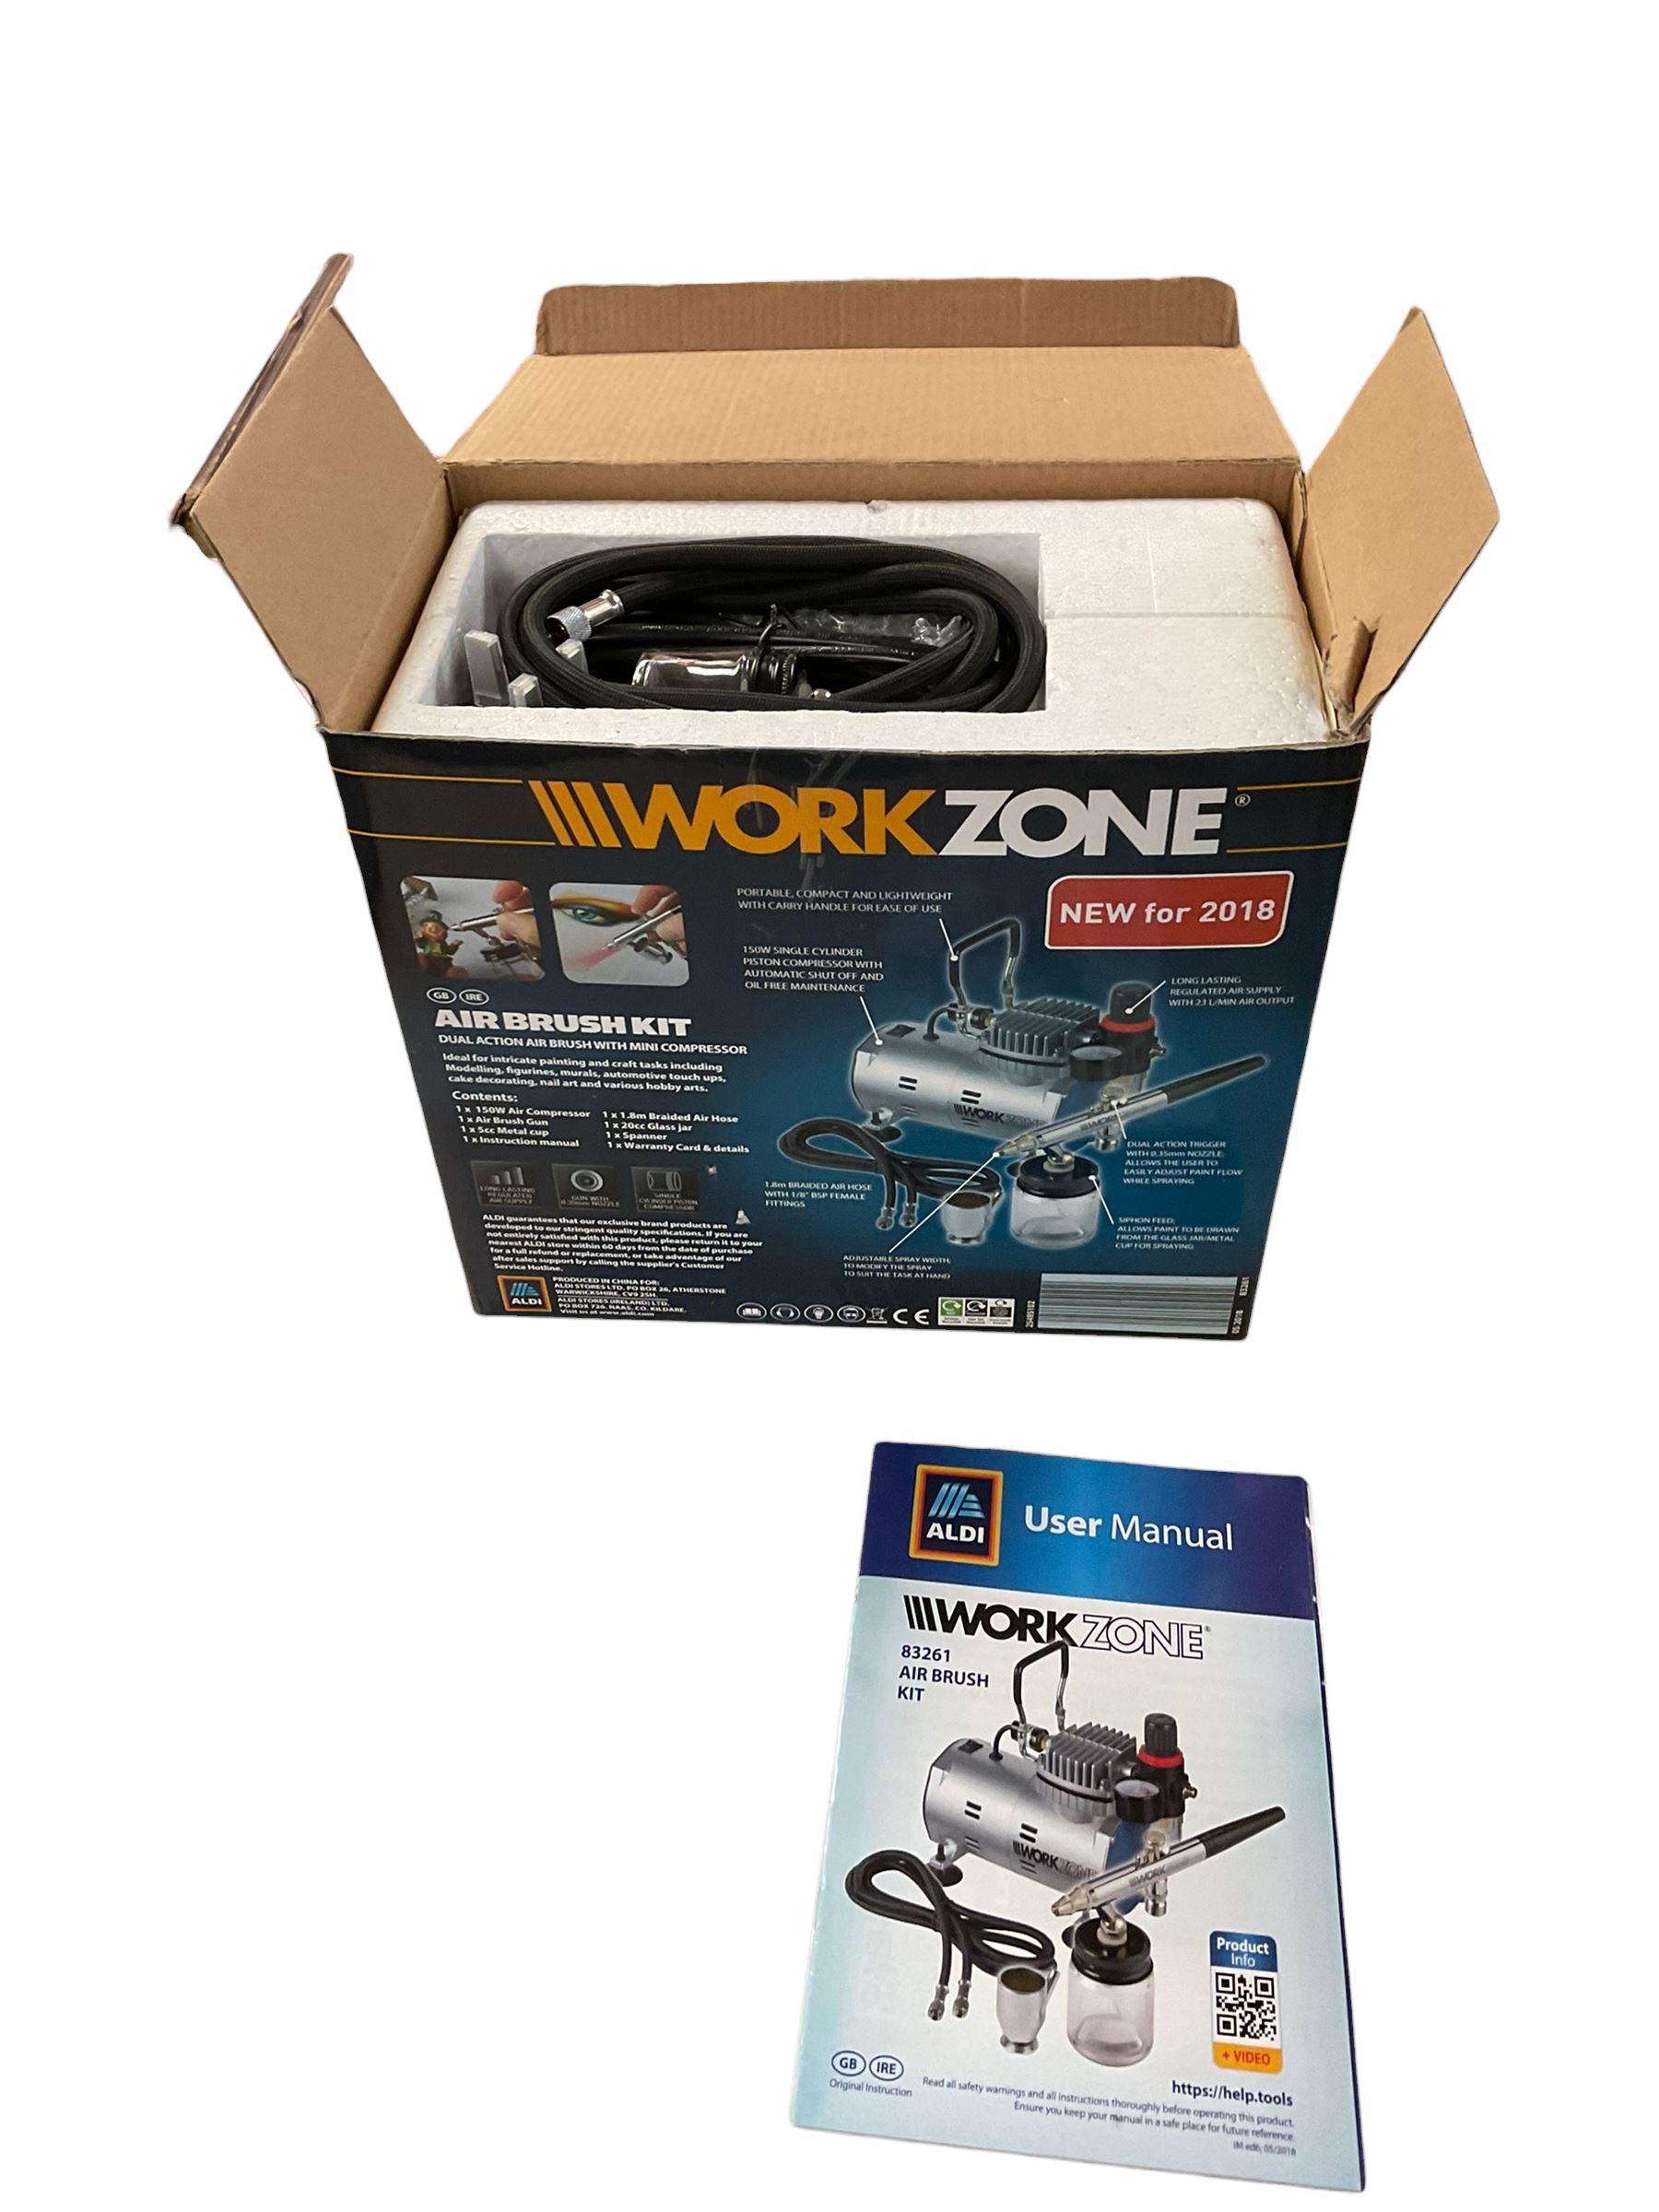 Workzone air compressor with attachments - Image 4 of 4